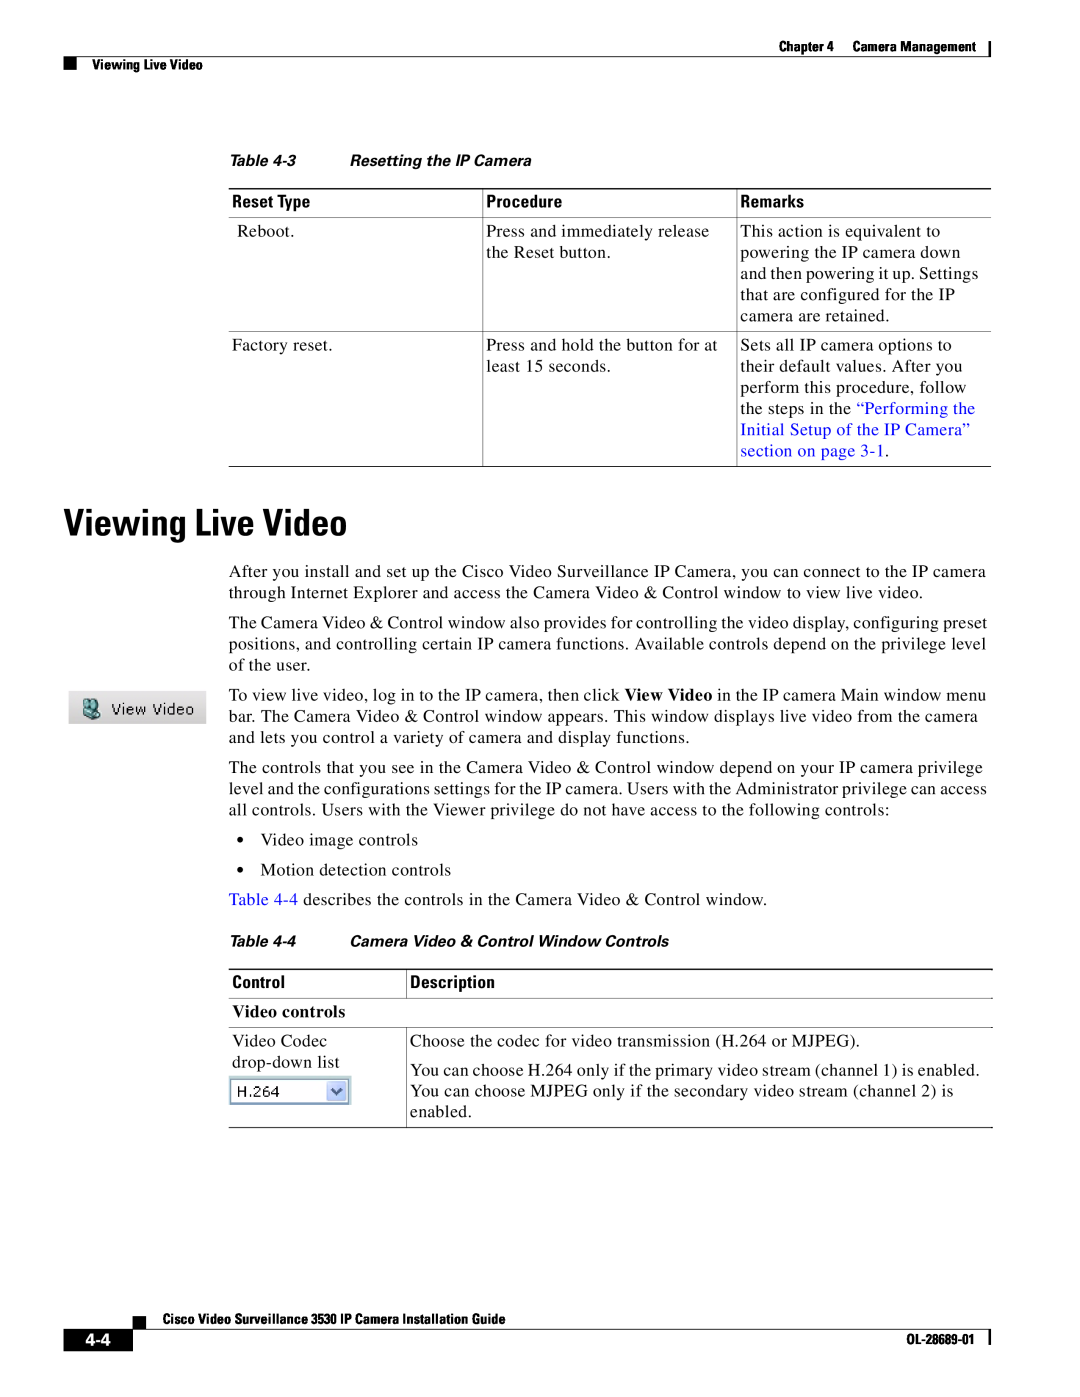 Cisco Systems 3530 manual Viewing Live Video, Initial Setup of the IP Camera”, section on page, Video controls, Reset Type 